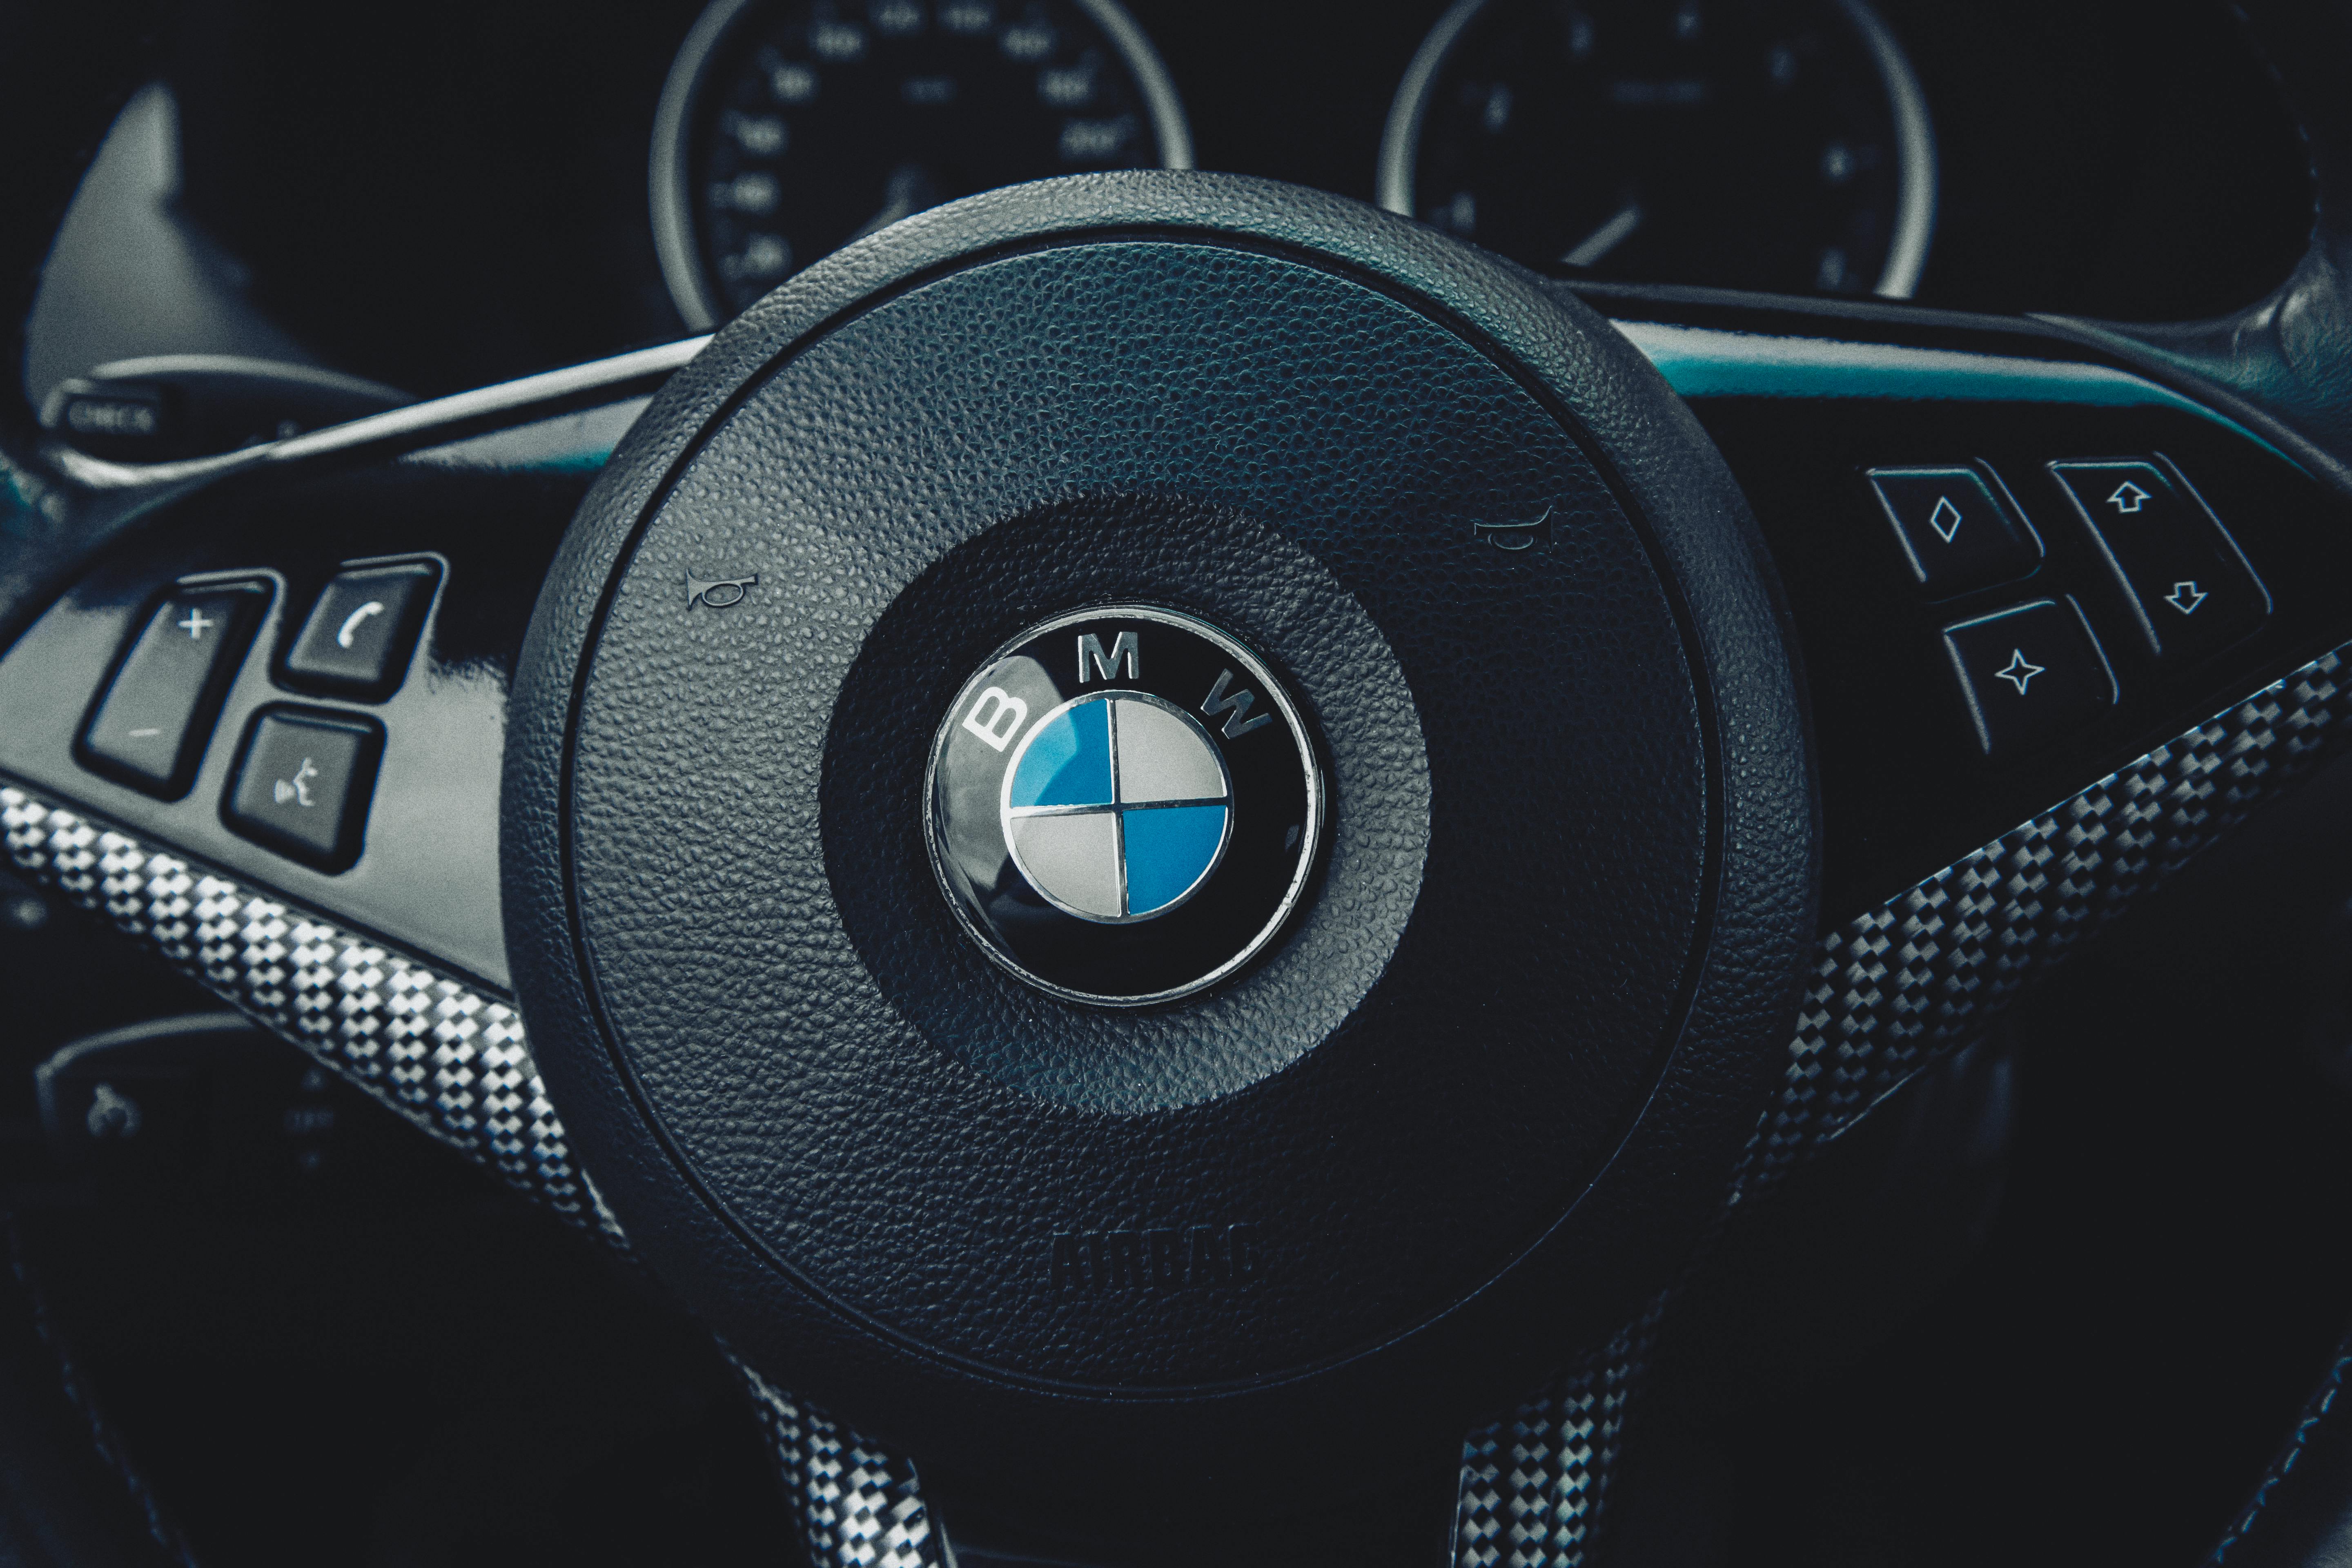 Close-up Photo of the BMW Emblem on Steering Wheel · Free Stock Photo